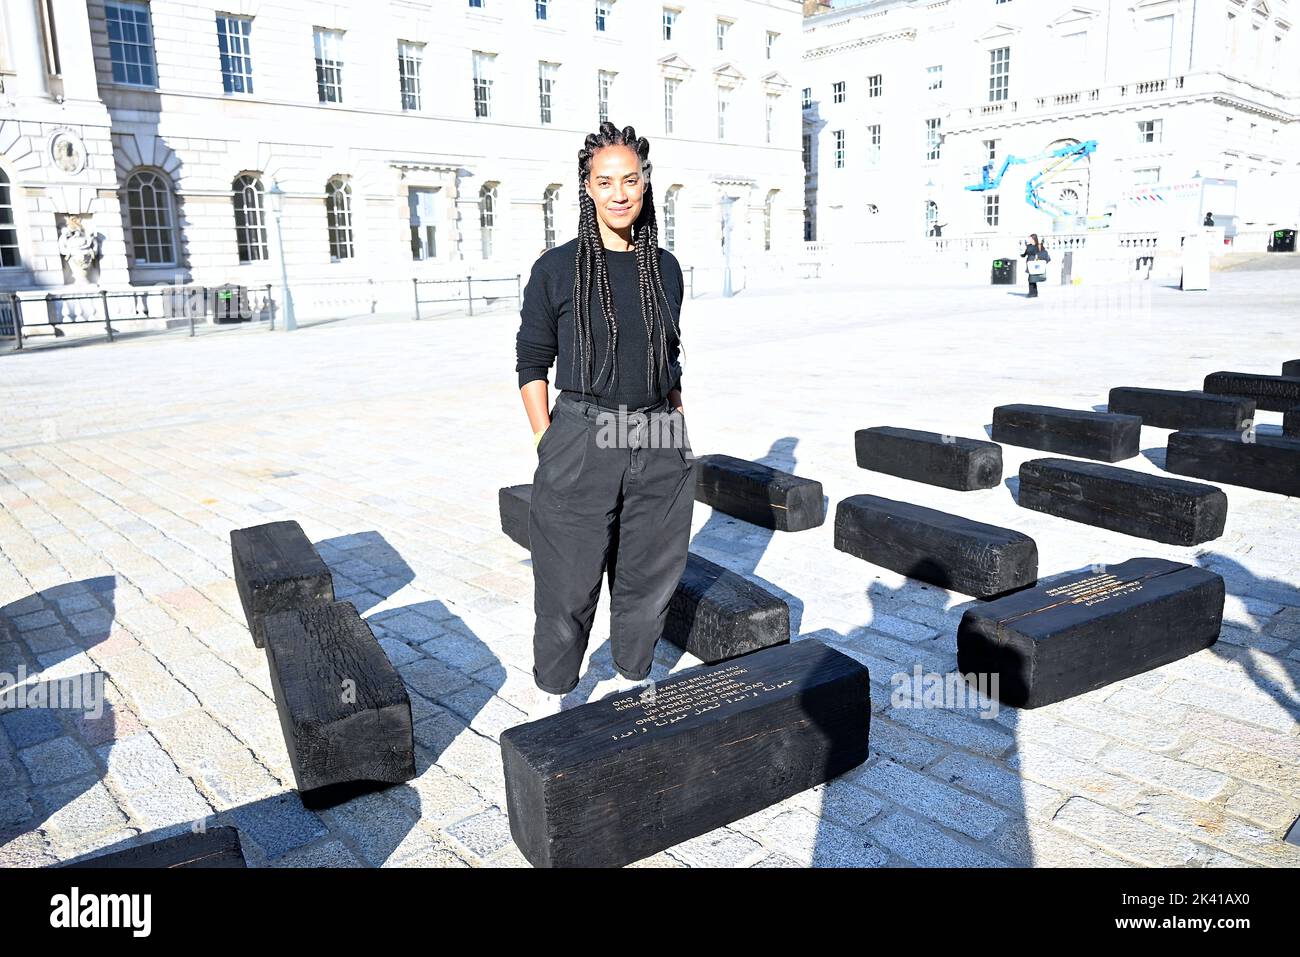 Interdisciplinary artist Grada Kilomba brings her critically acclaimed installation O Barco/The Boat to Somerset House this Autumn. Displayed in the UK for the first time , the large installation and performance is specially presented by Somerset House on the occasion of the 10th anniversary of the 1-54 Contemporary African Art Fair .Grada  Kilomba is a Portuguese Berlin based transdisciplinary artist whose work draws on memory , trauma , gender and post colonialism ... Stock Photo